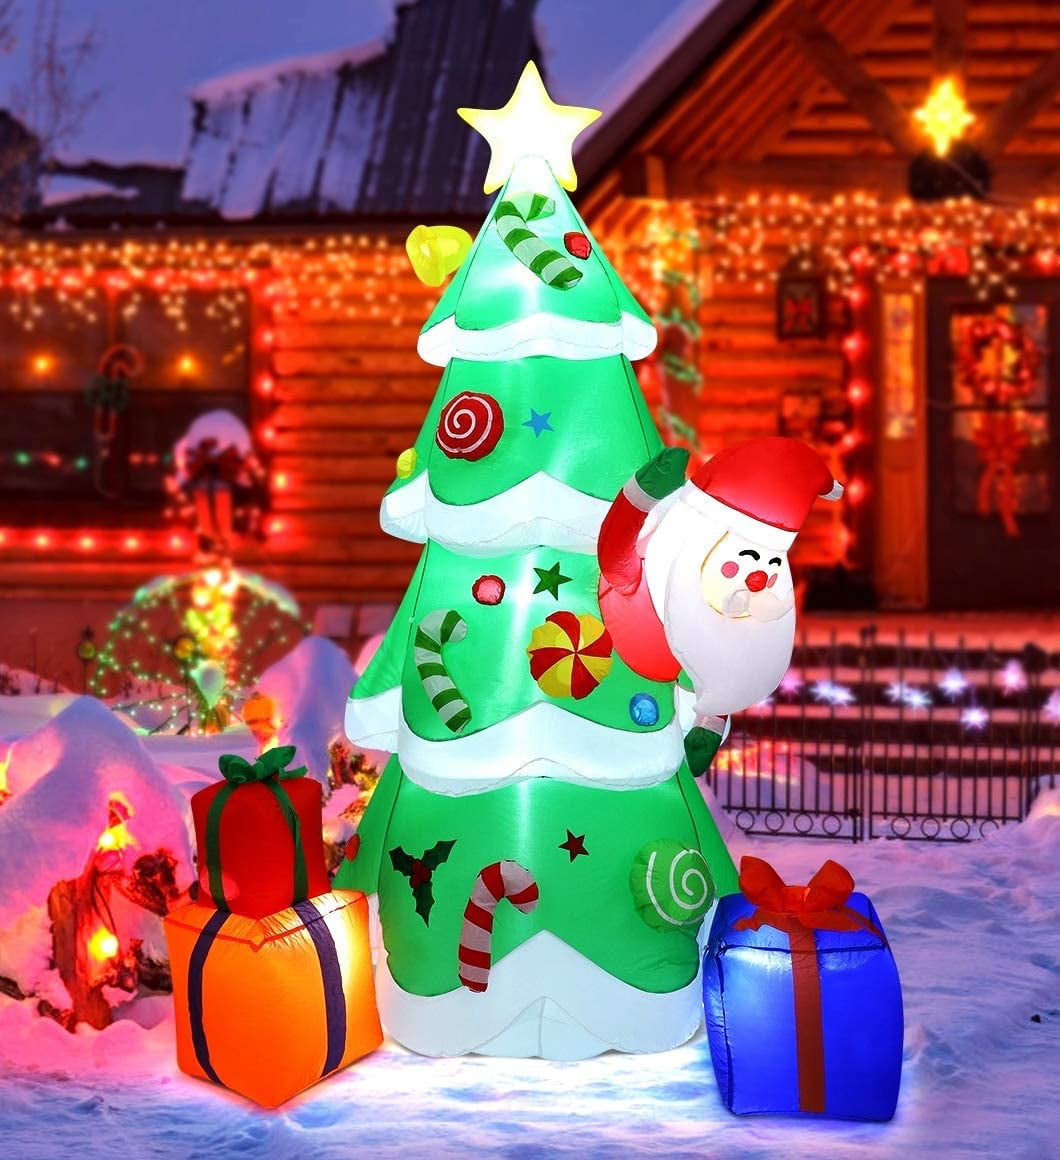 DecorX Christmas Inflatables 7ft Christmas Decorations Outdoor